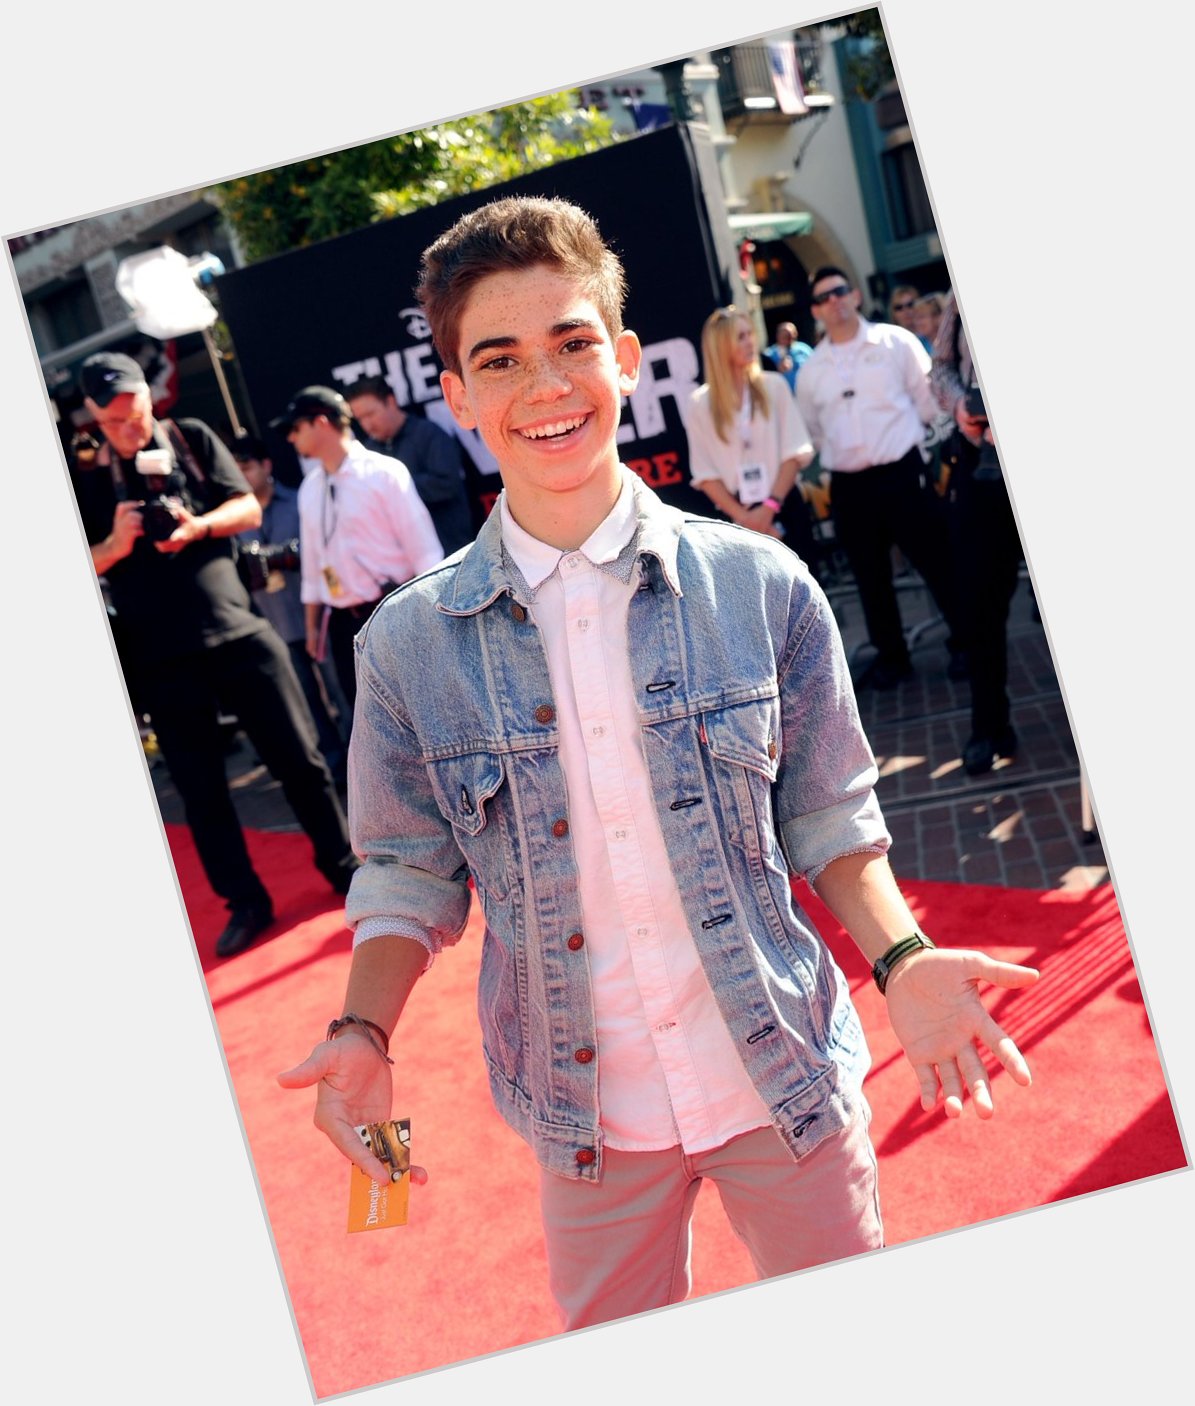 Happy birthday See 16 pics of him growing up on the red carpet:  